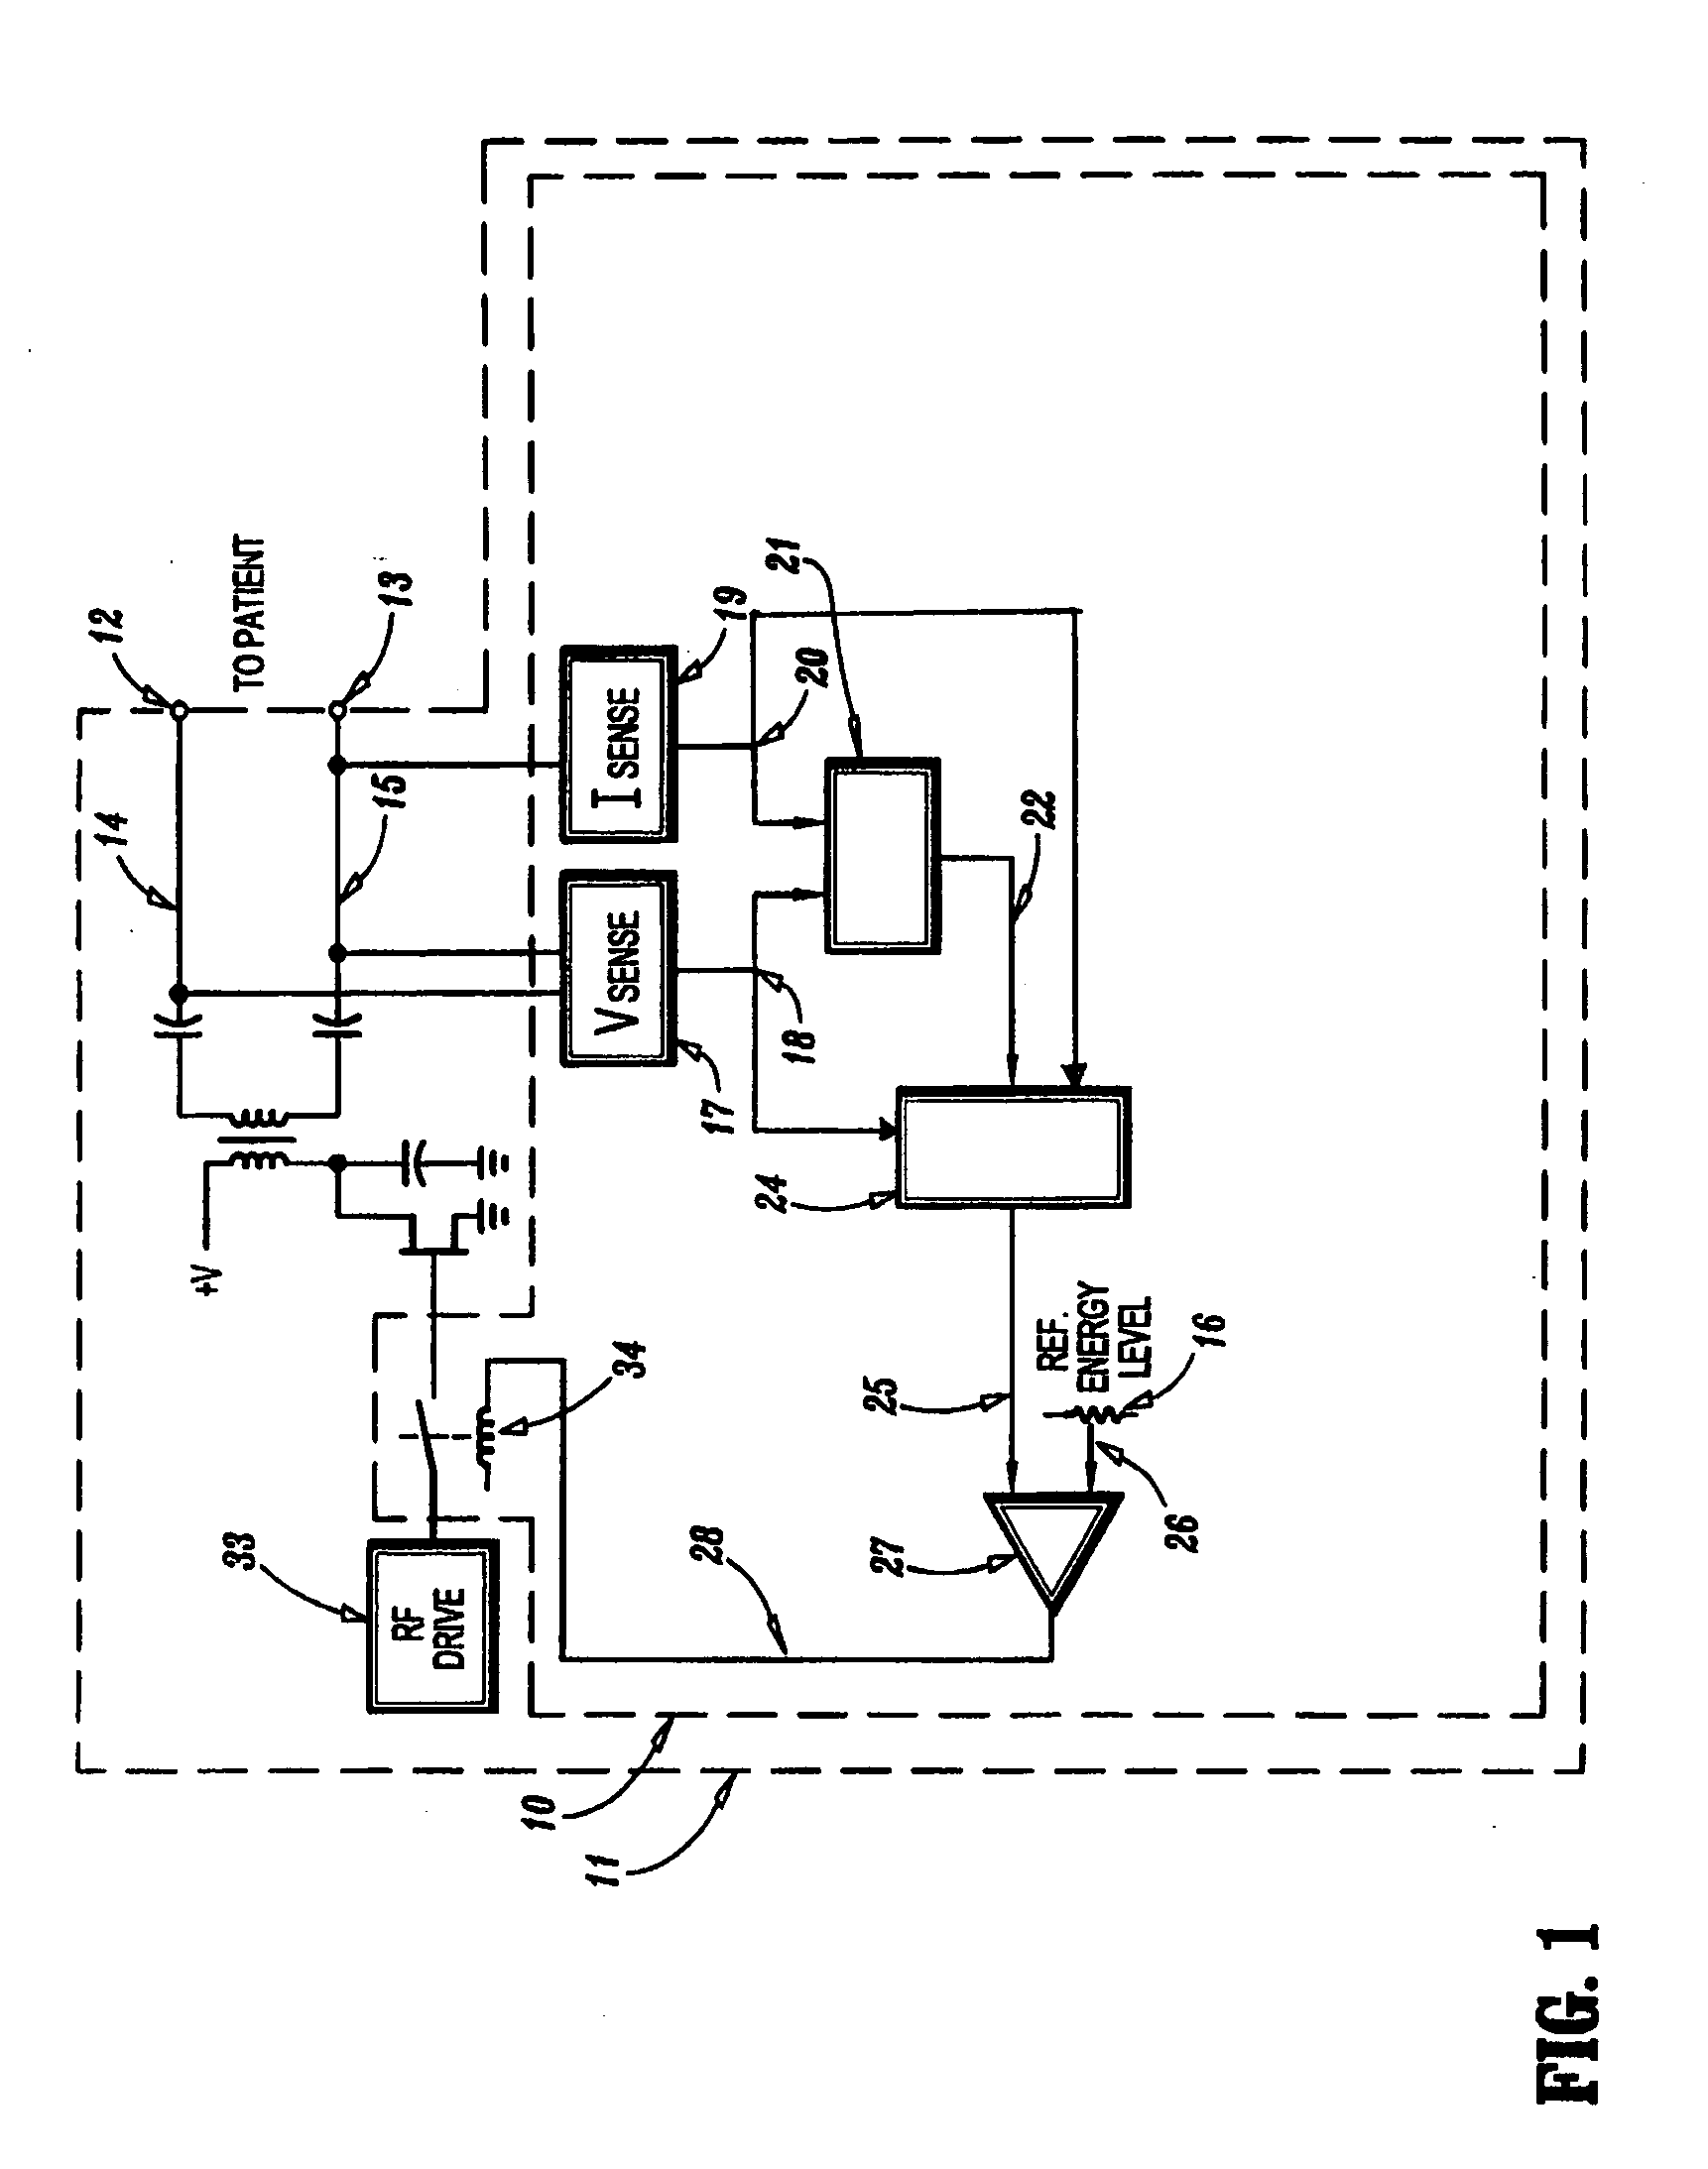 Automatic control system for an electrosurgical generator